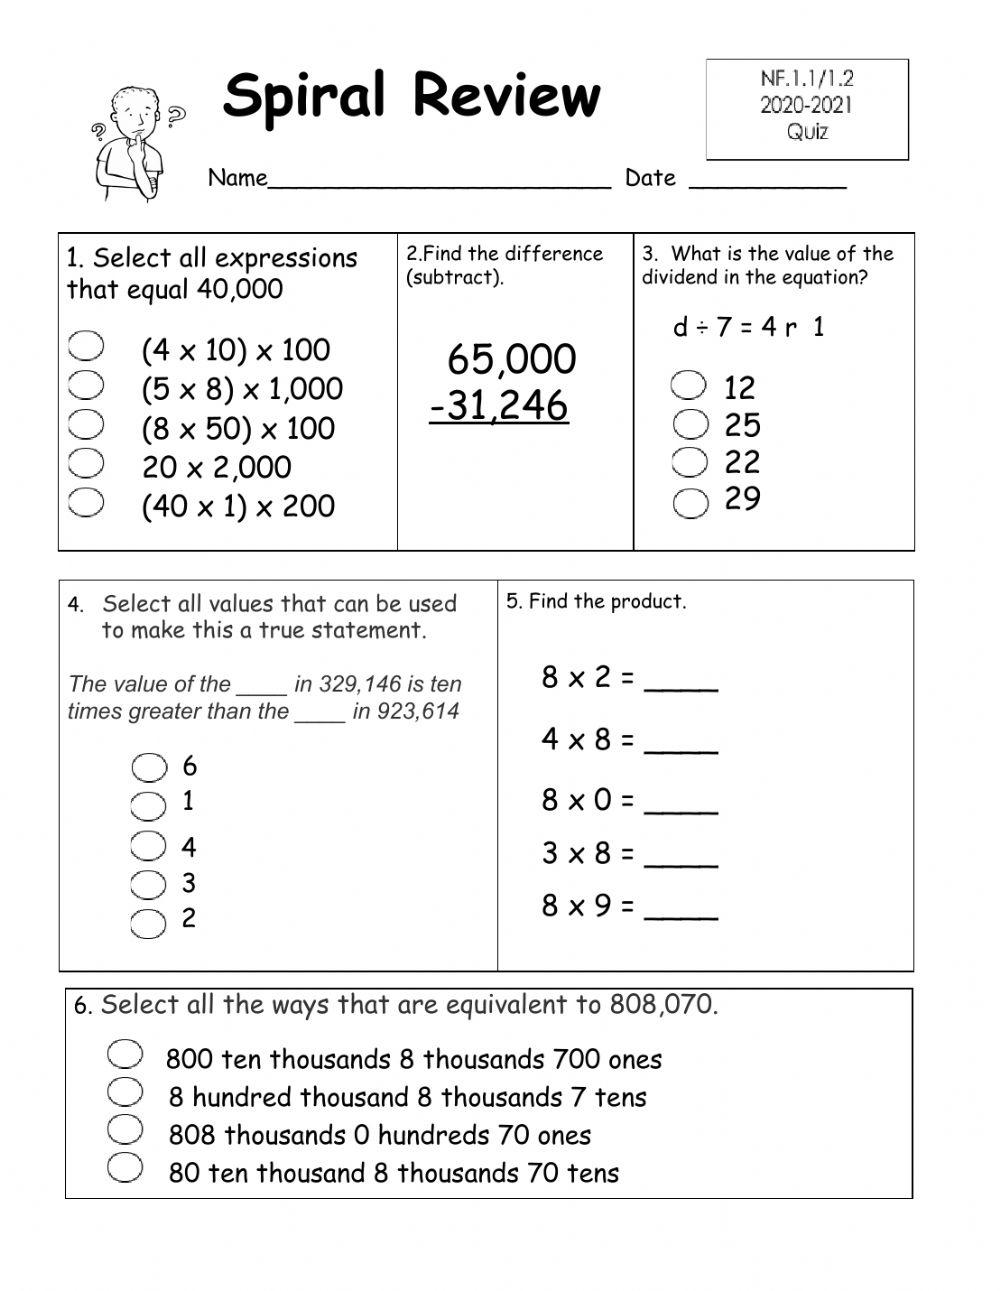 Spiral Review Quiz NF1.1-1.2